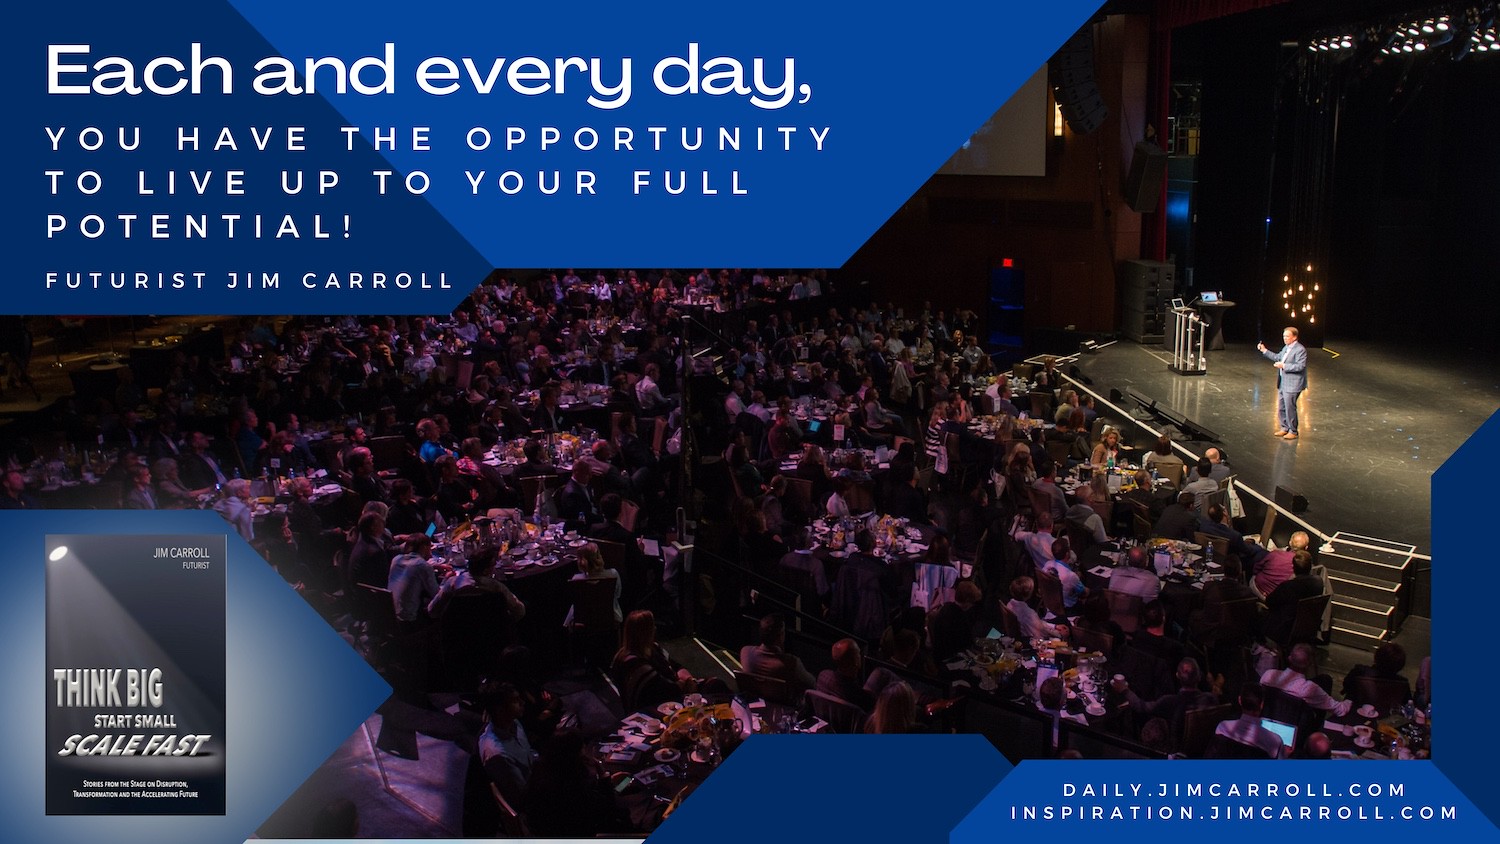 "Each and every day, you have the opportunity to live up to your full potential!" - Futurist Jim Carroll